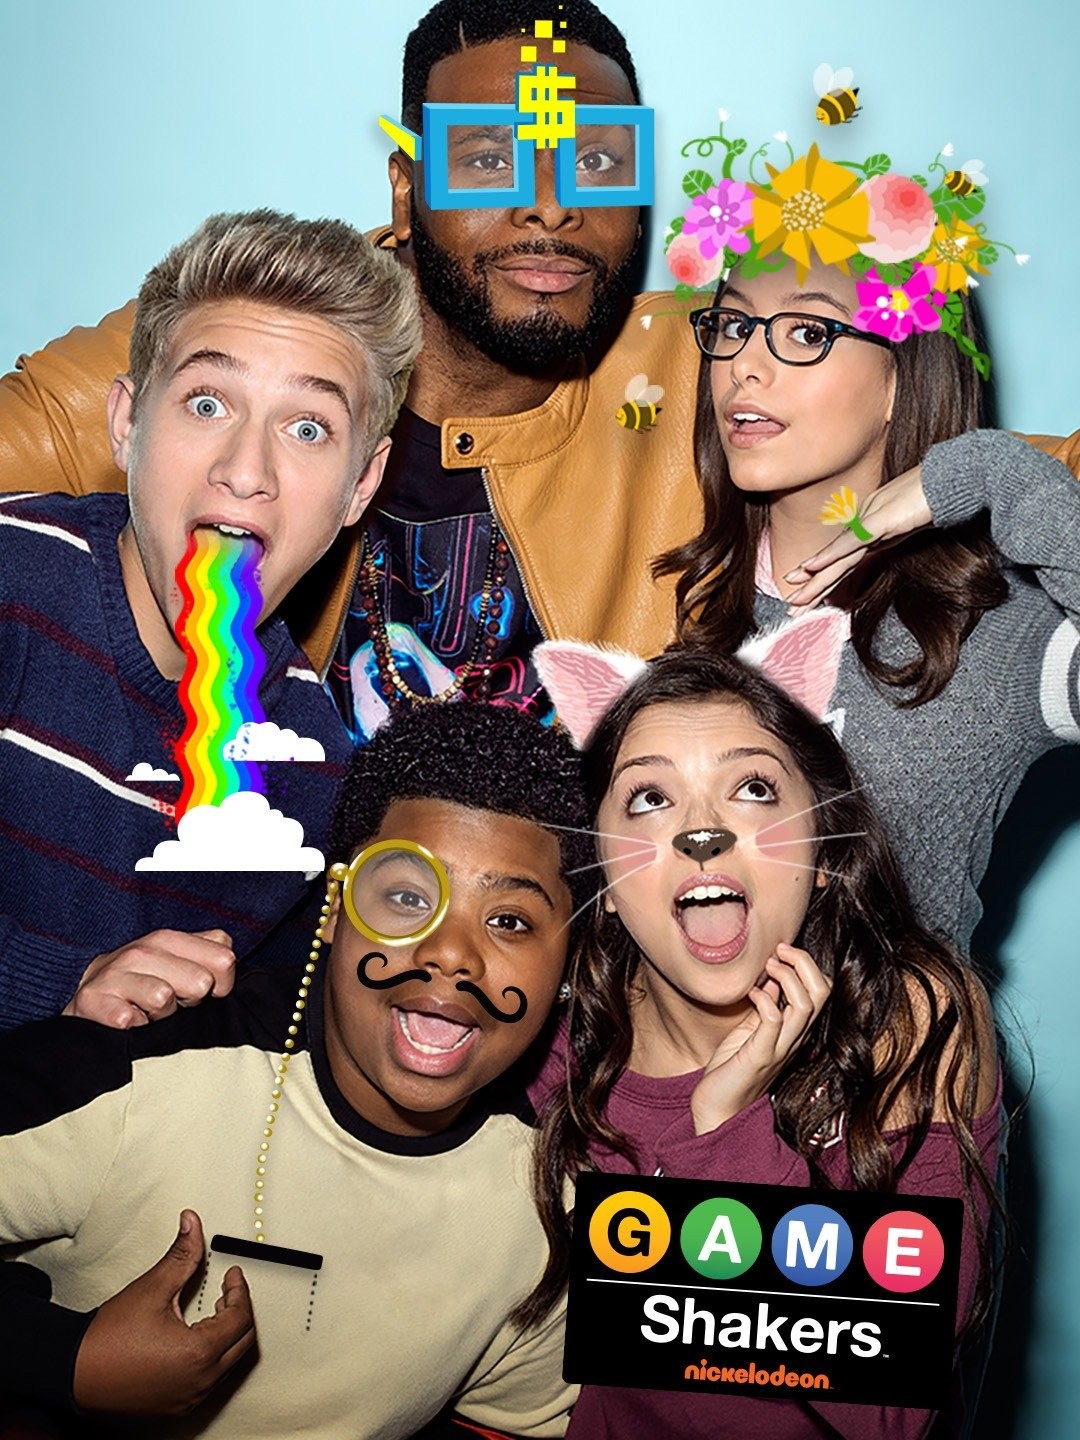 100+] Game Shakers Pictures